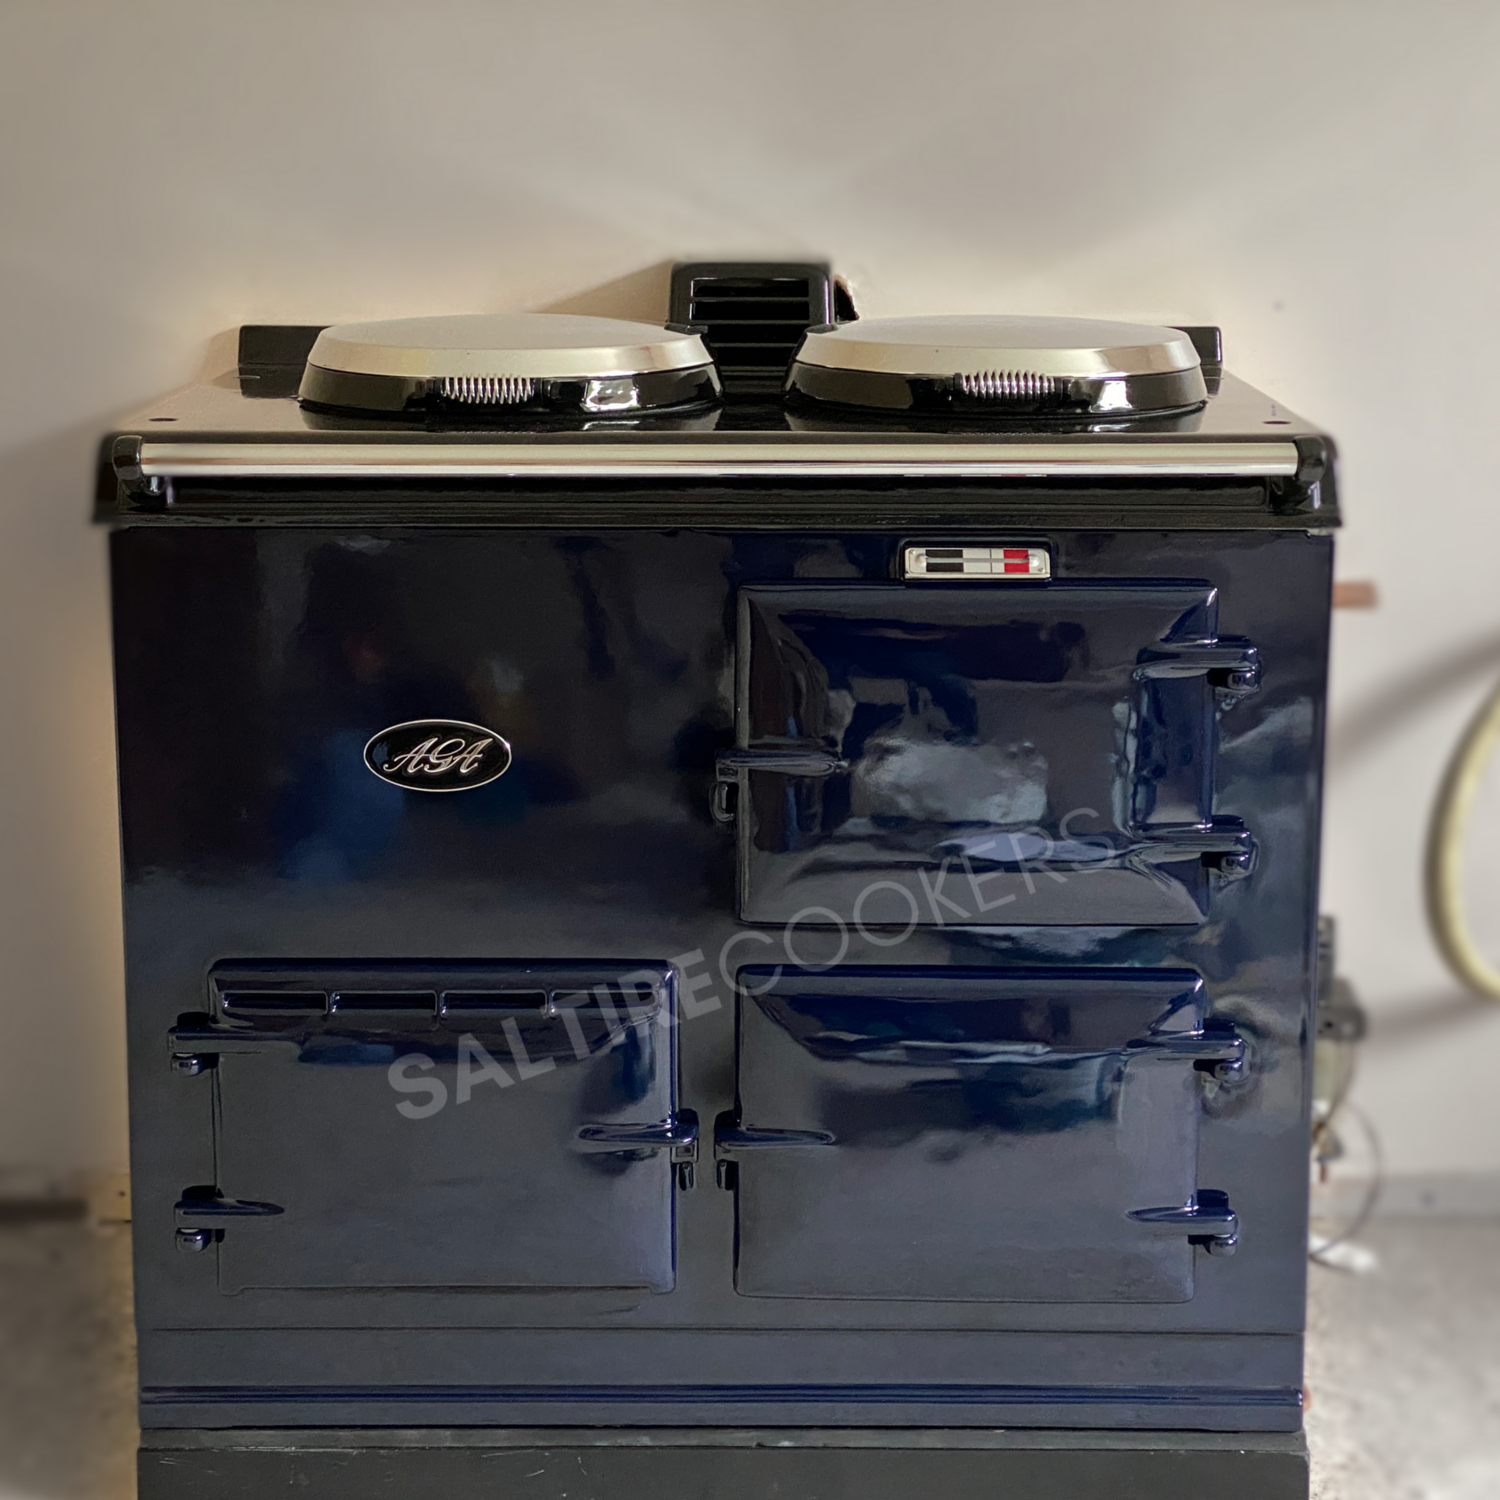 Reconditioned 2 Oven Oil Aga Cooker (Oxford Blue)